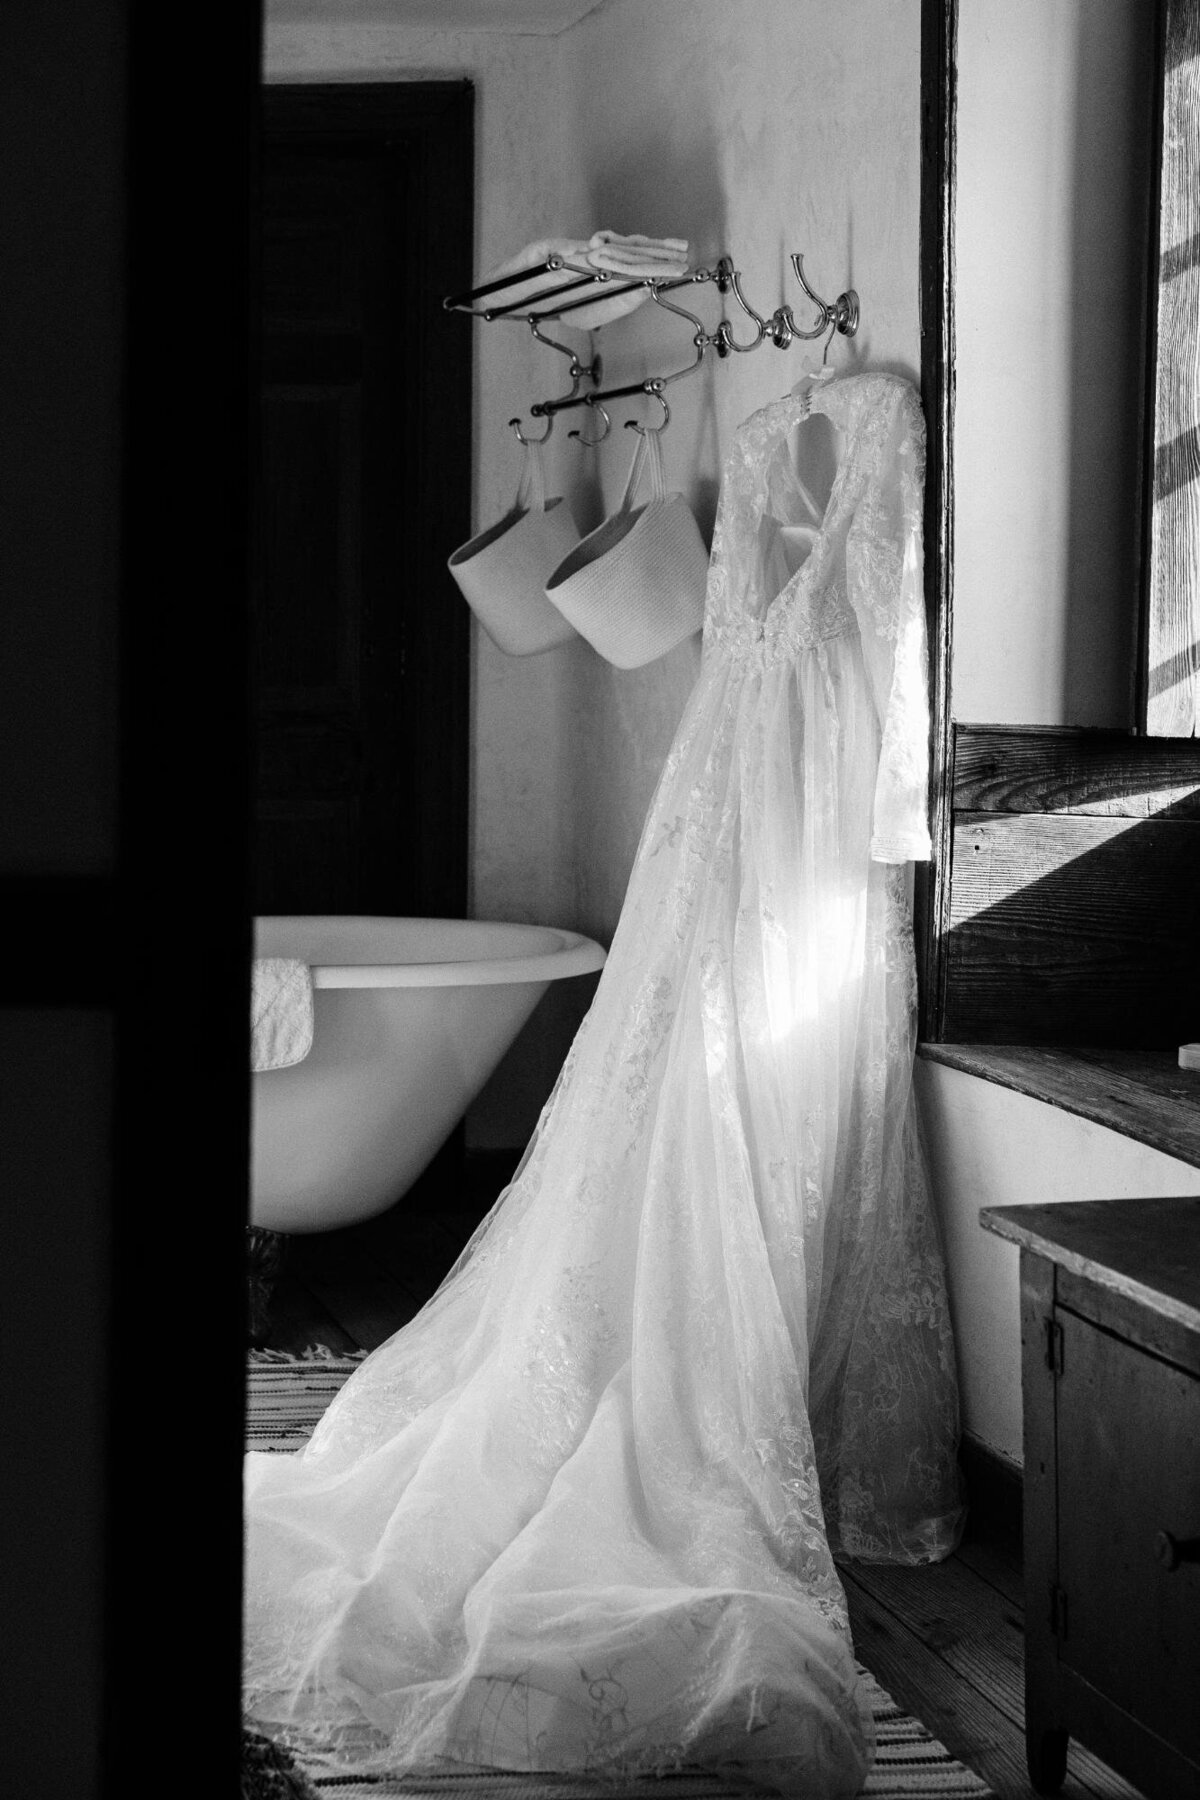 A lace wedding dress hanging beside a bathtub in a room with natural light casting shadows.